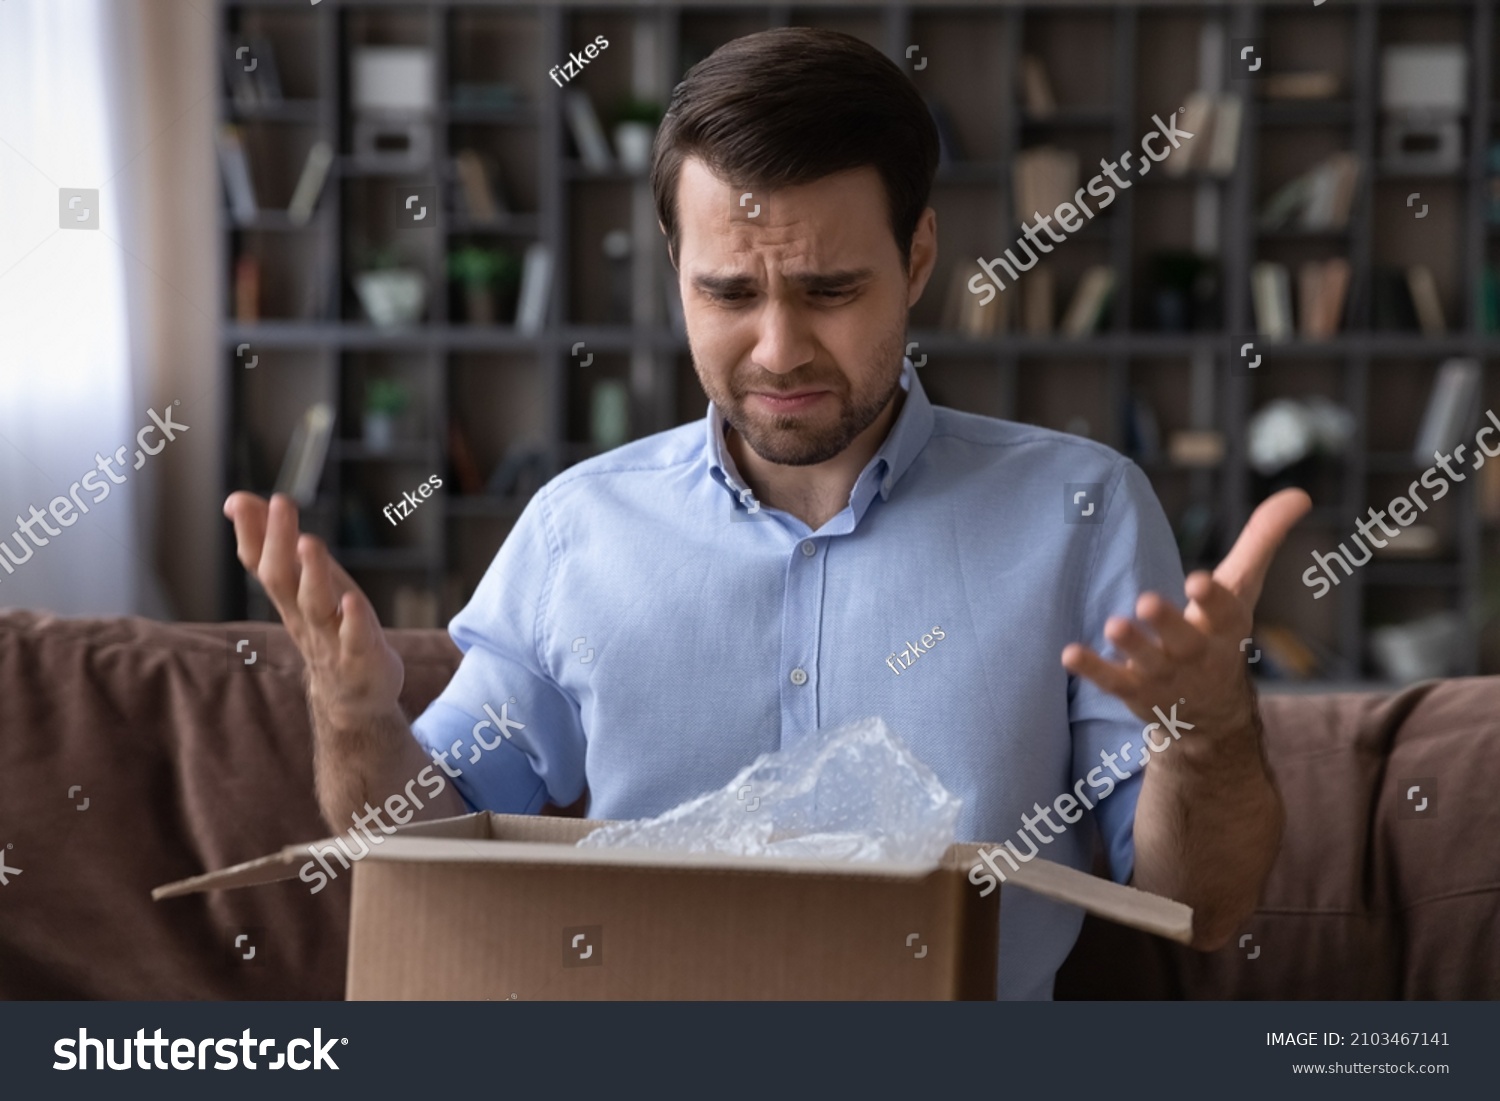 Head shot unhappy dissatisfied man opening parcel at home, sitting on couch with cardboard box, angry displeased customer confused by wrong or damaged order, bad delivery shipping service concept #2103467141